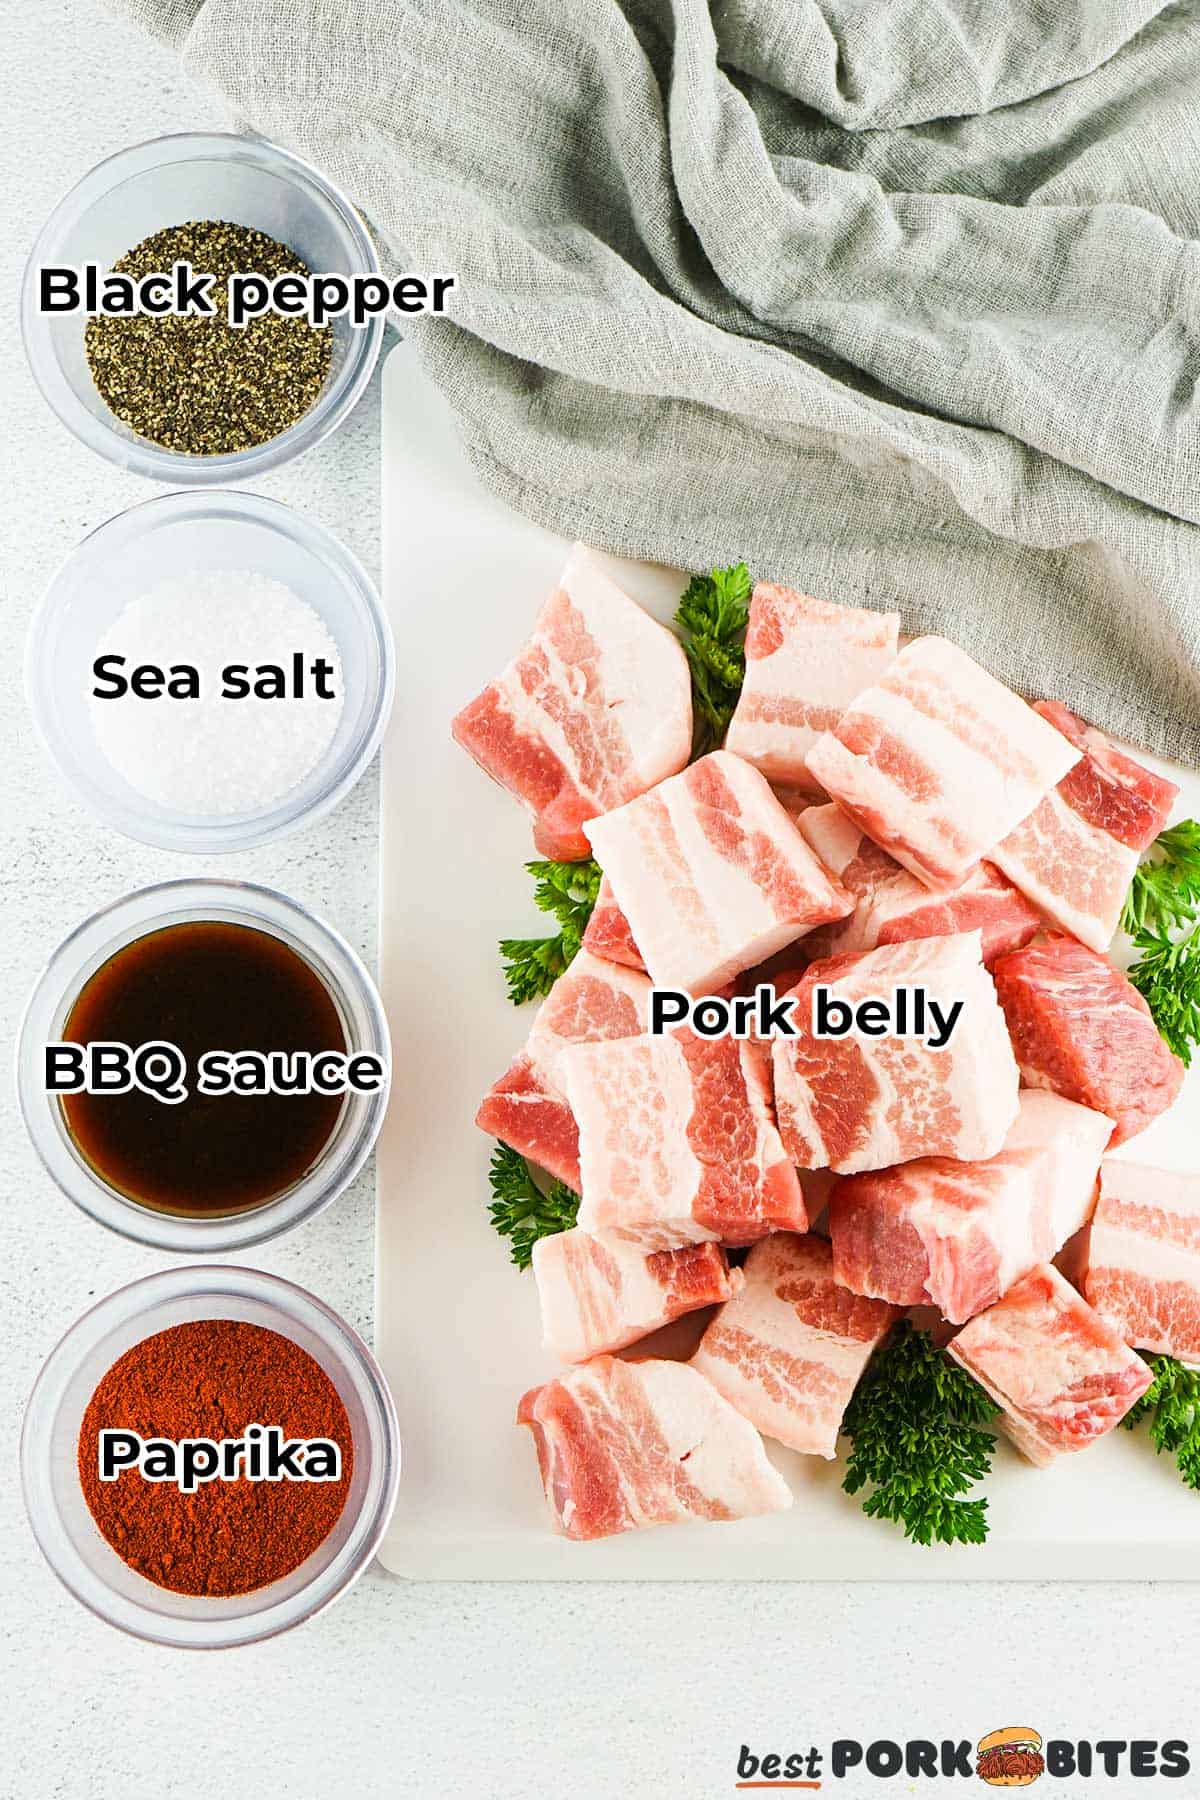 the ingredients for pork belly burnt ends in separate dishes with labels